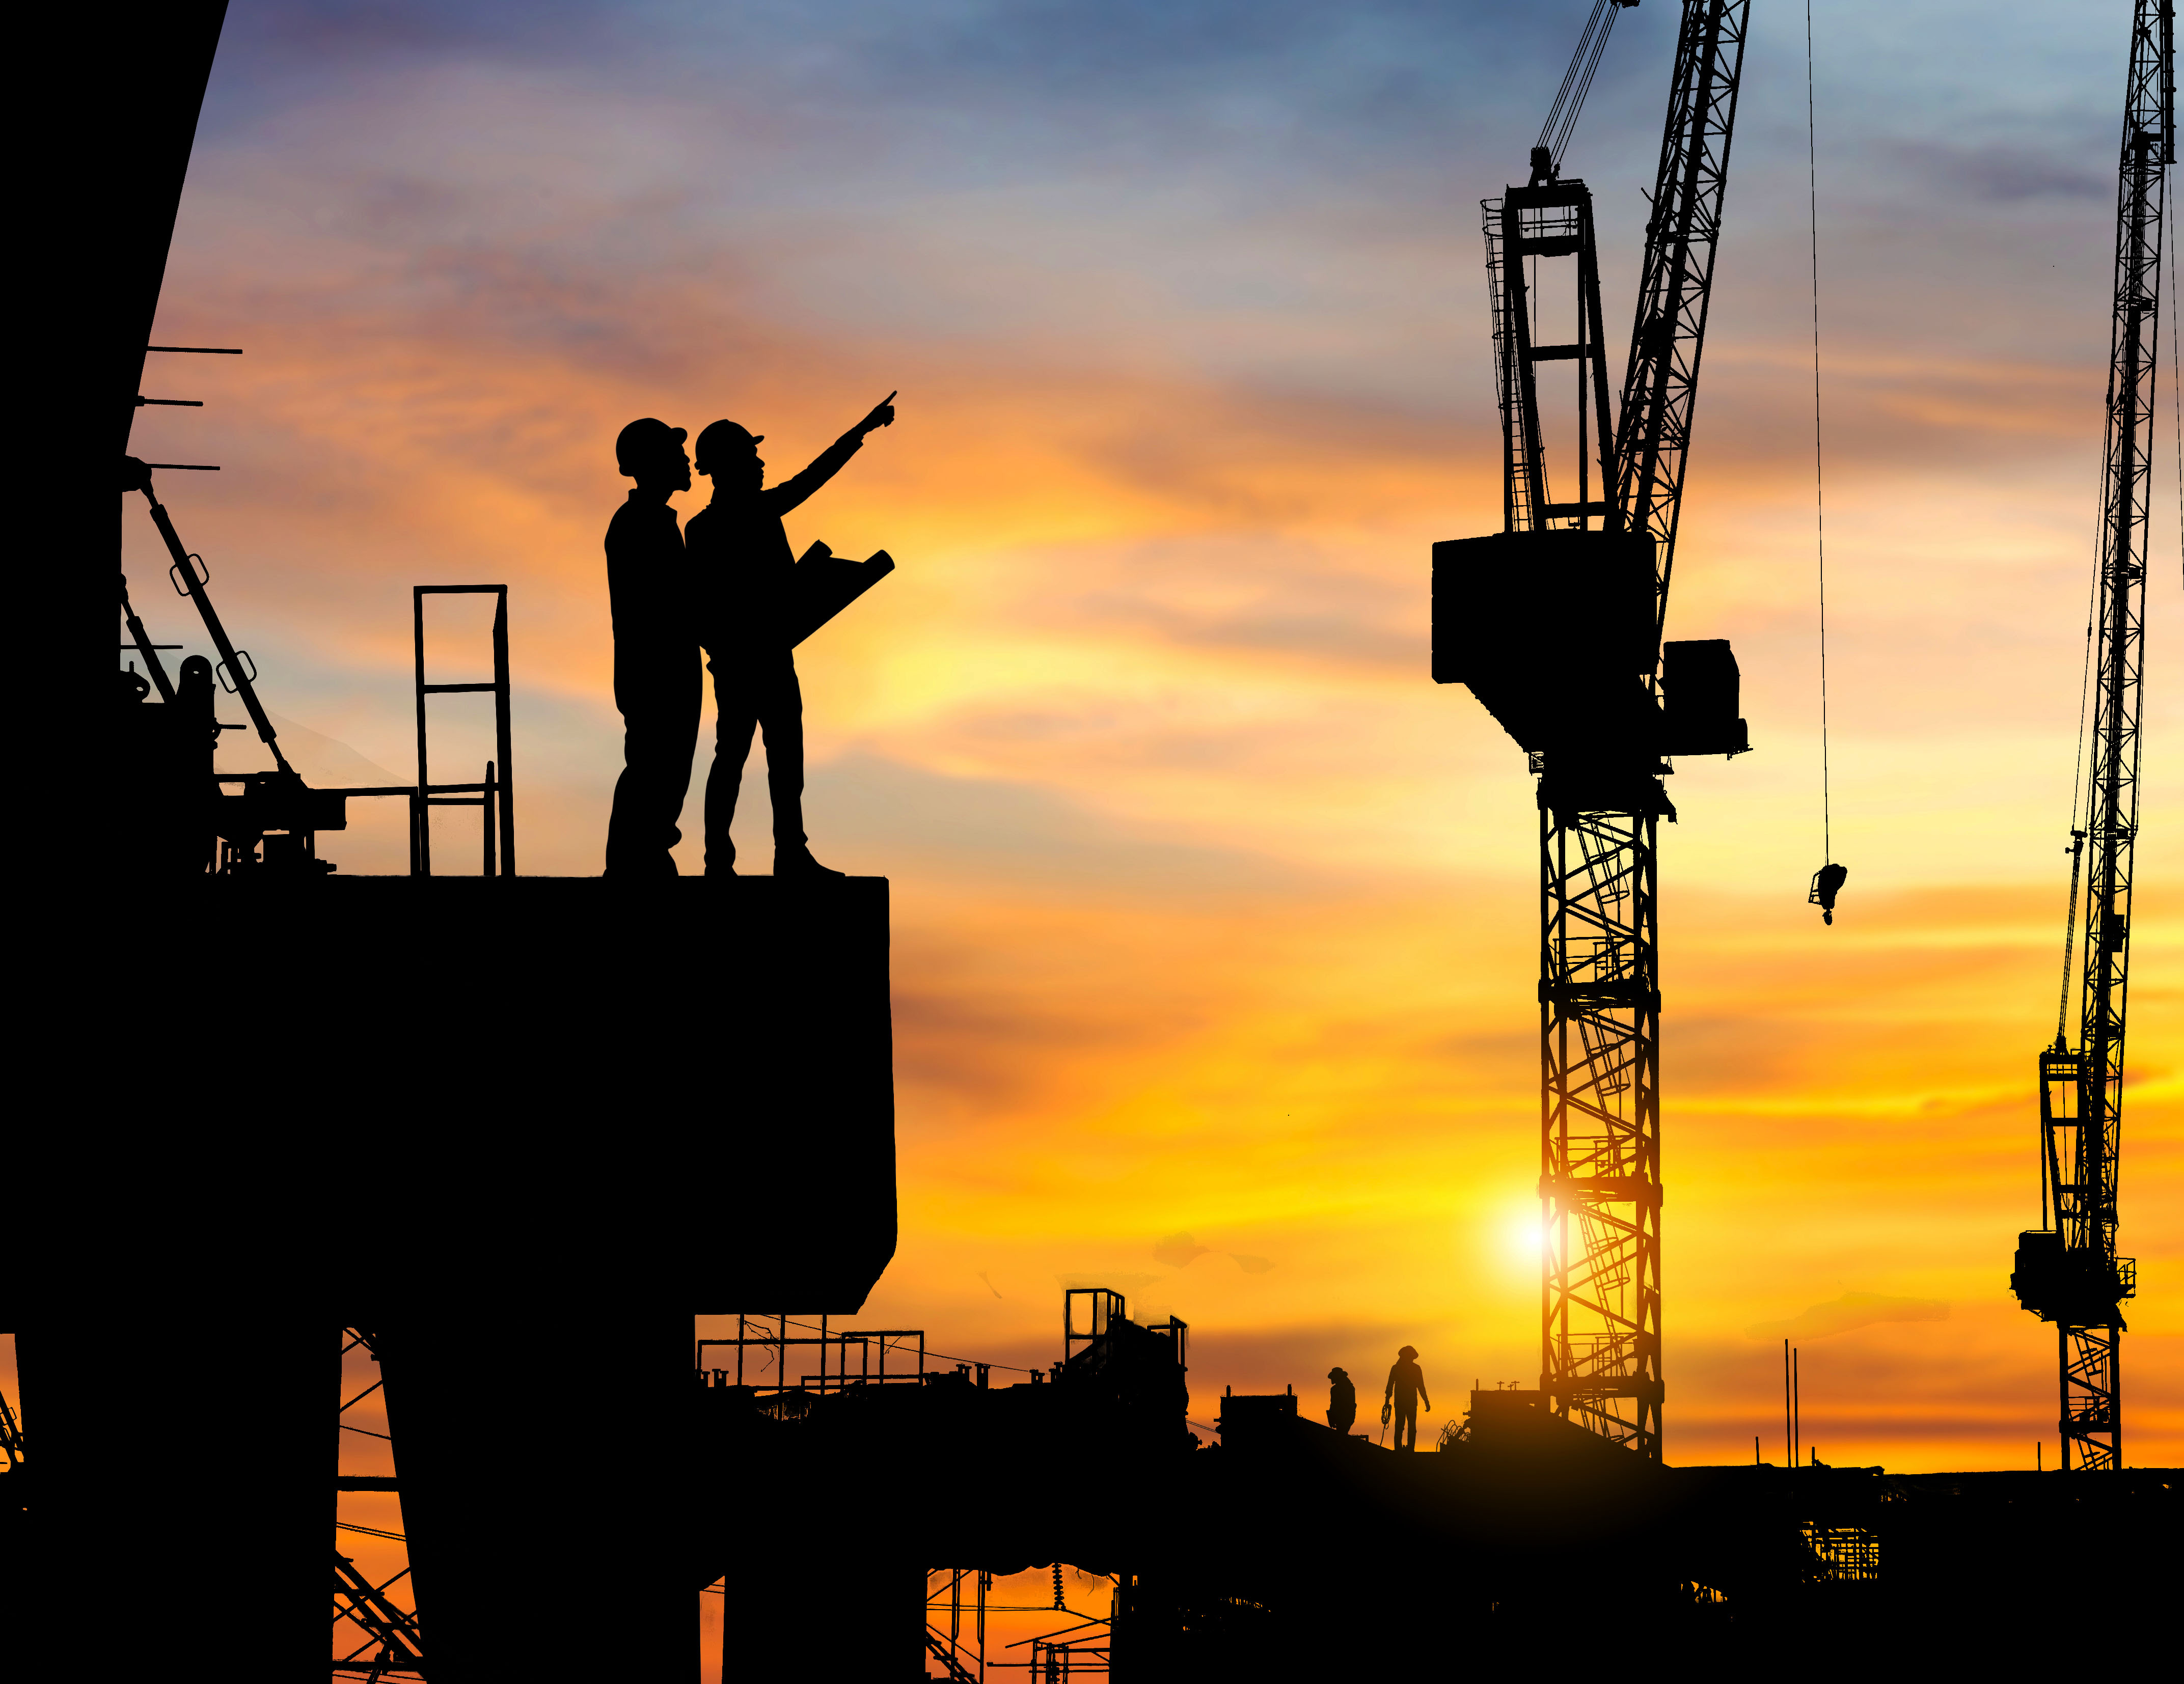 silhouette-engineer-worker-checking-project-construction-siteat-sunset-evening-timeedit